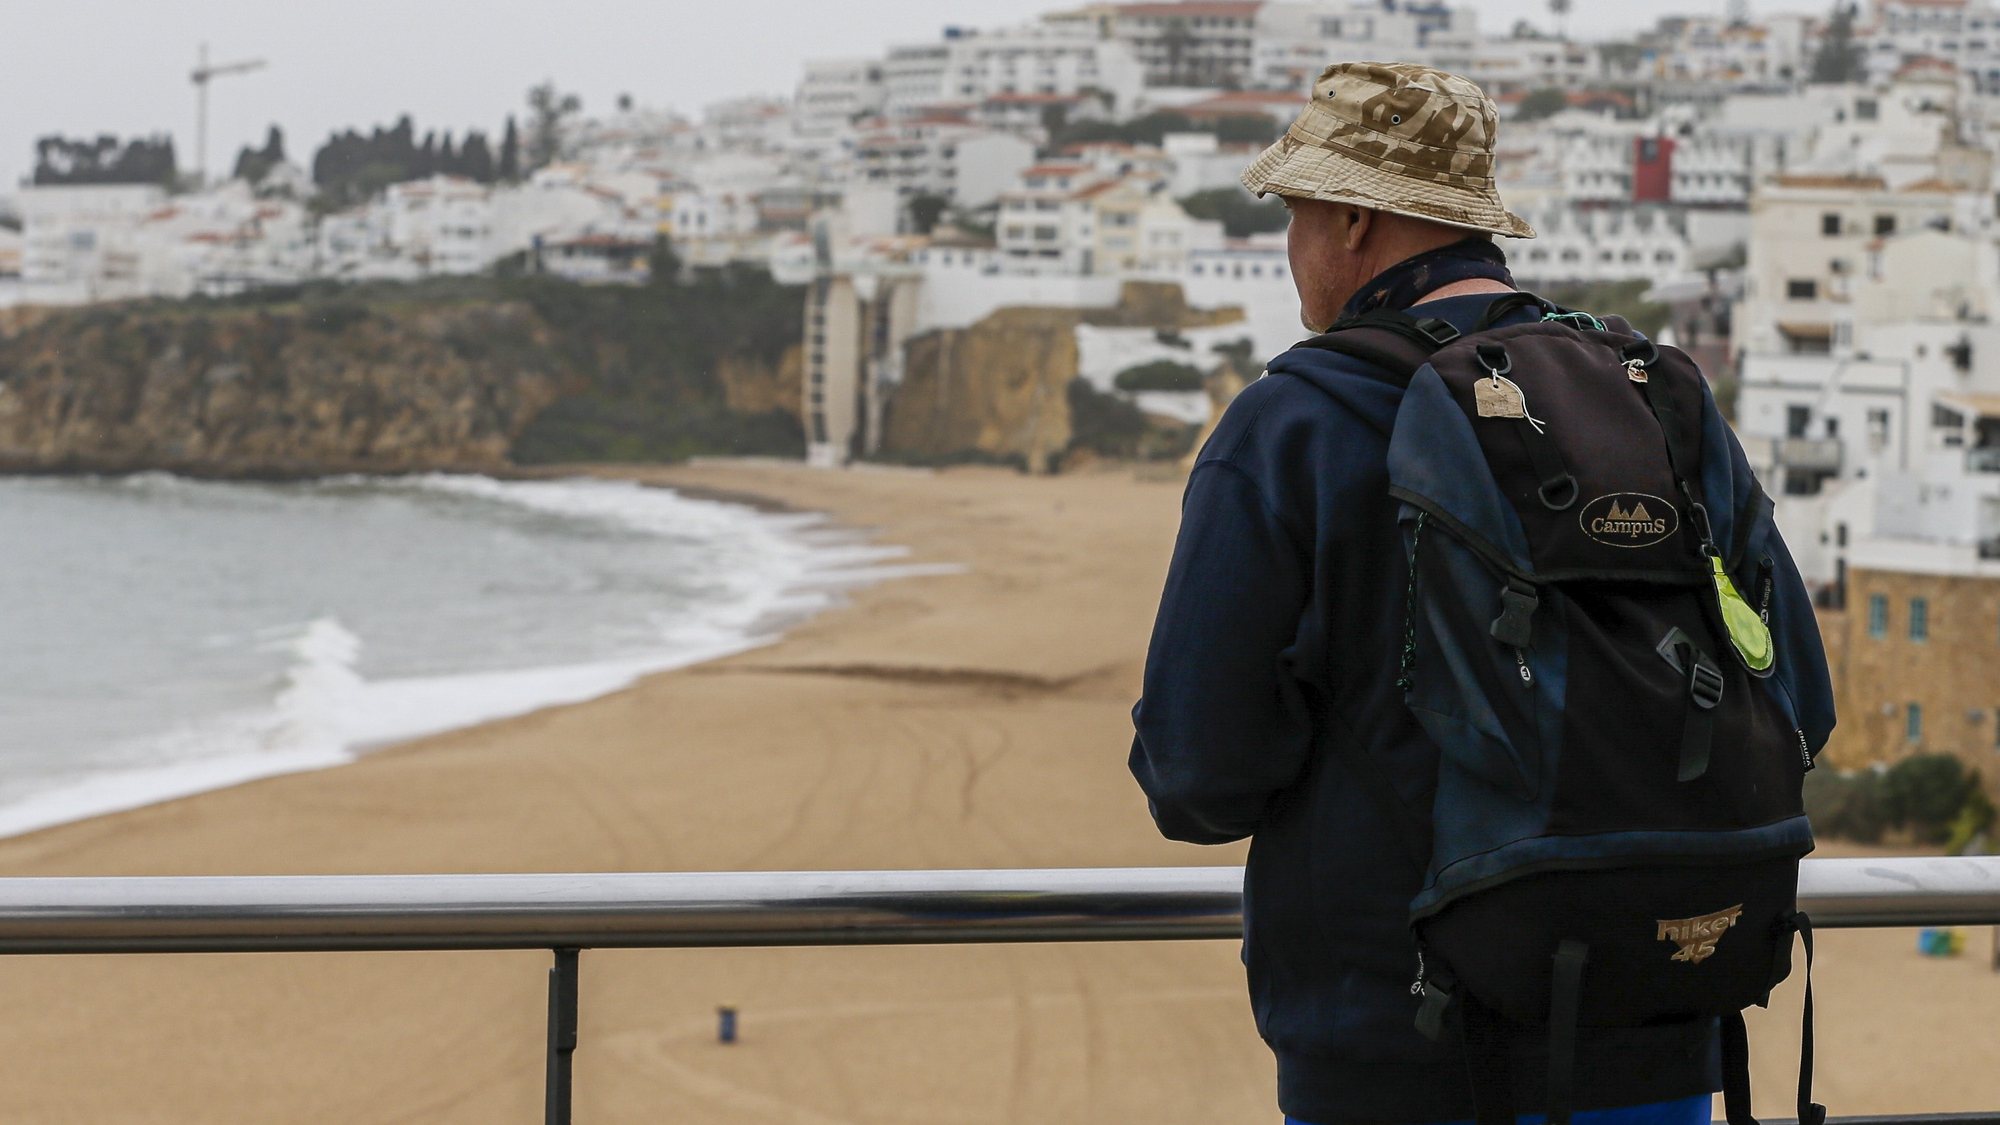 epa08307447 A tourist looks at the beach of Albufeira, Algarve, southern Portugal, 19 March 2020. Countries around the world are taking increased measures to stem the widespread of the SARS-CoV-2 coronavirus which causes the Covid-19 disease. Portugal is in a state of emergency since midnight 19 March 2020.  EPA/LUIS FORRA